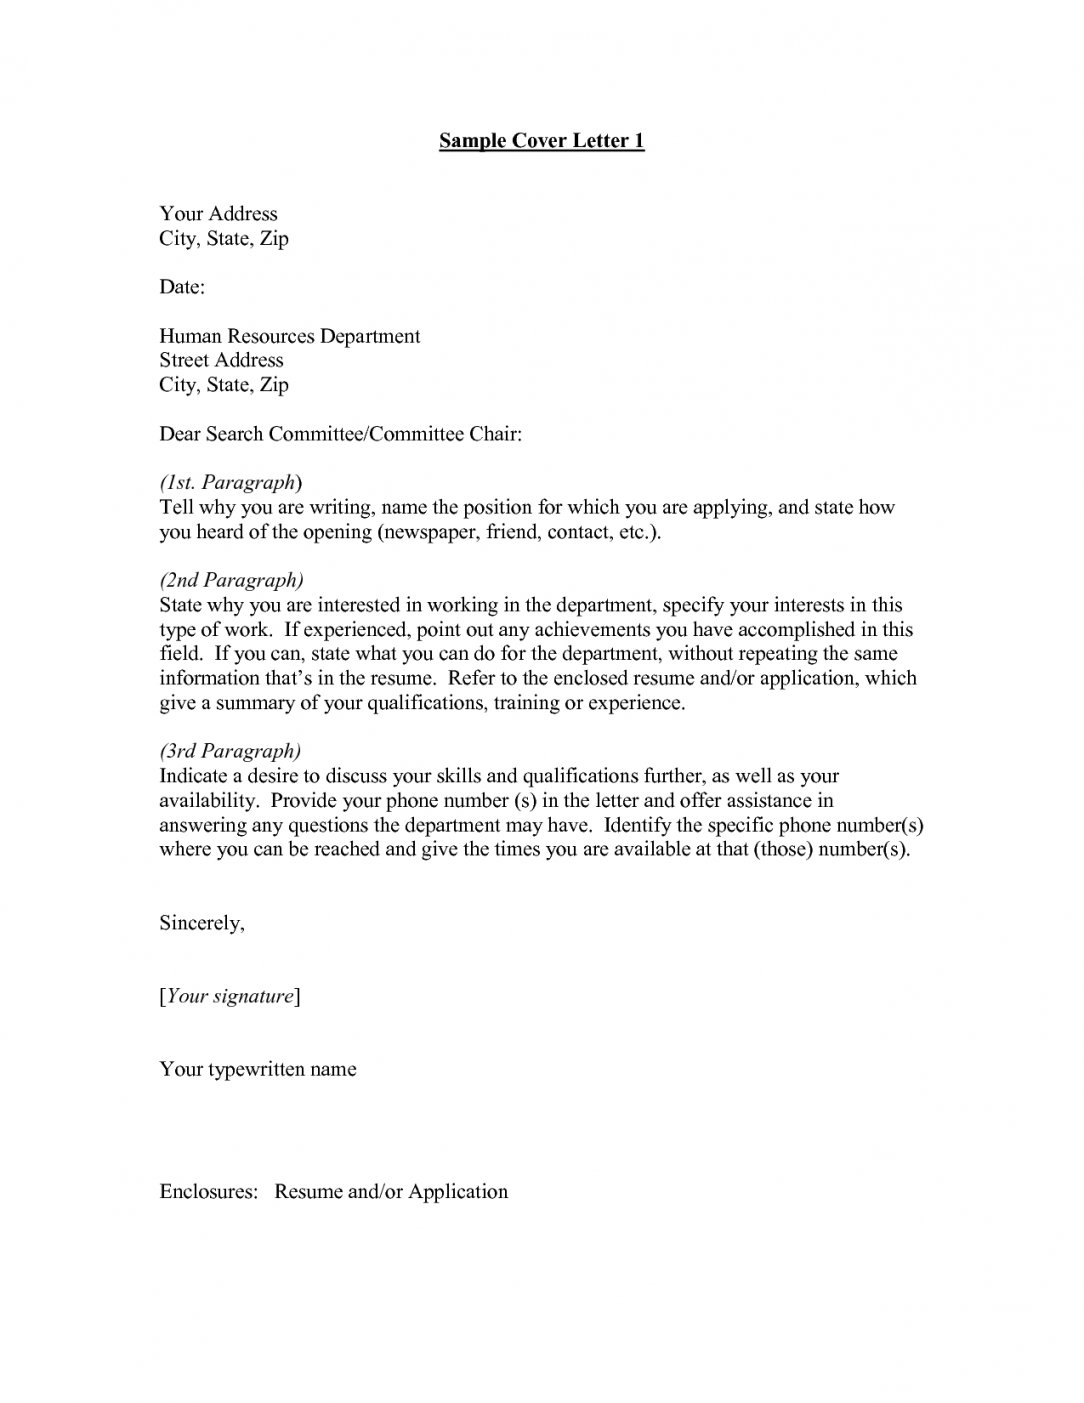 cover letter address to cover letter no name resume cover letter